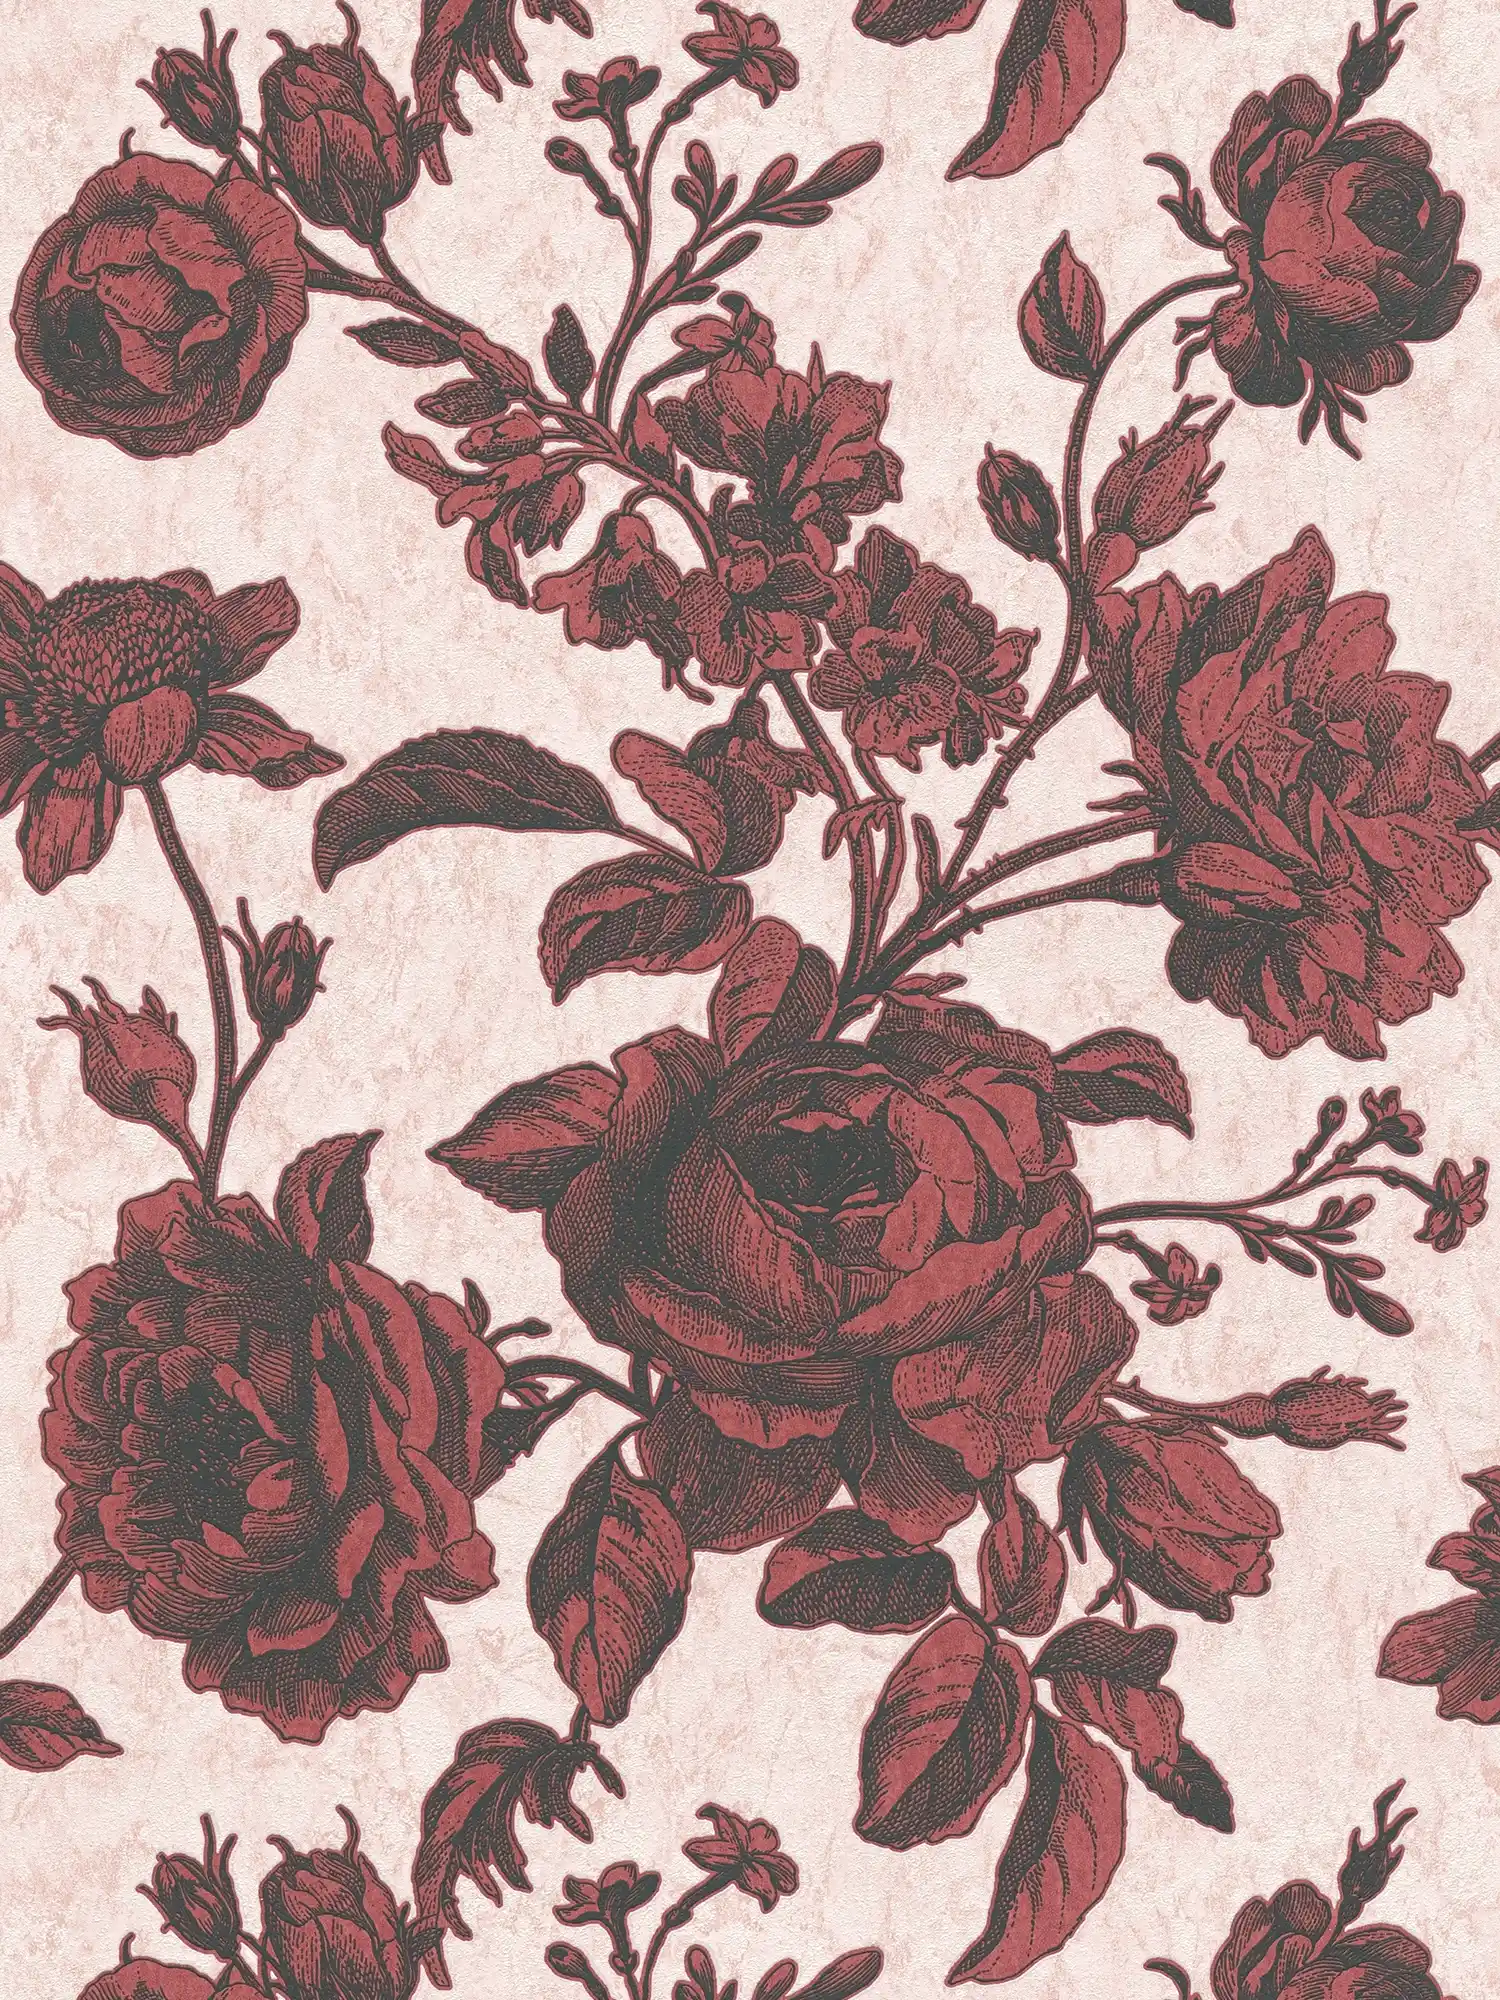 Roses wallpaper red-black in vintage sign style - pink, red
